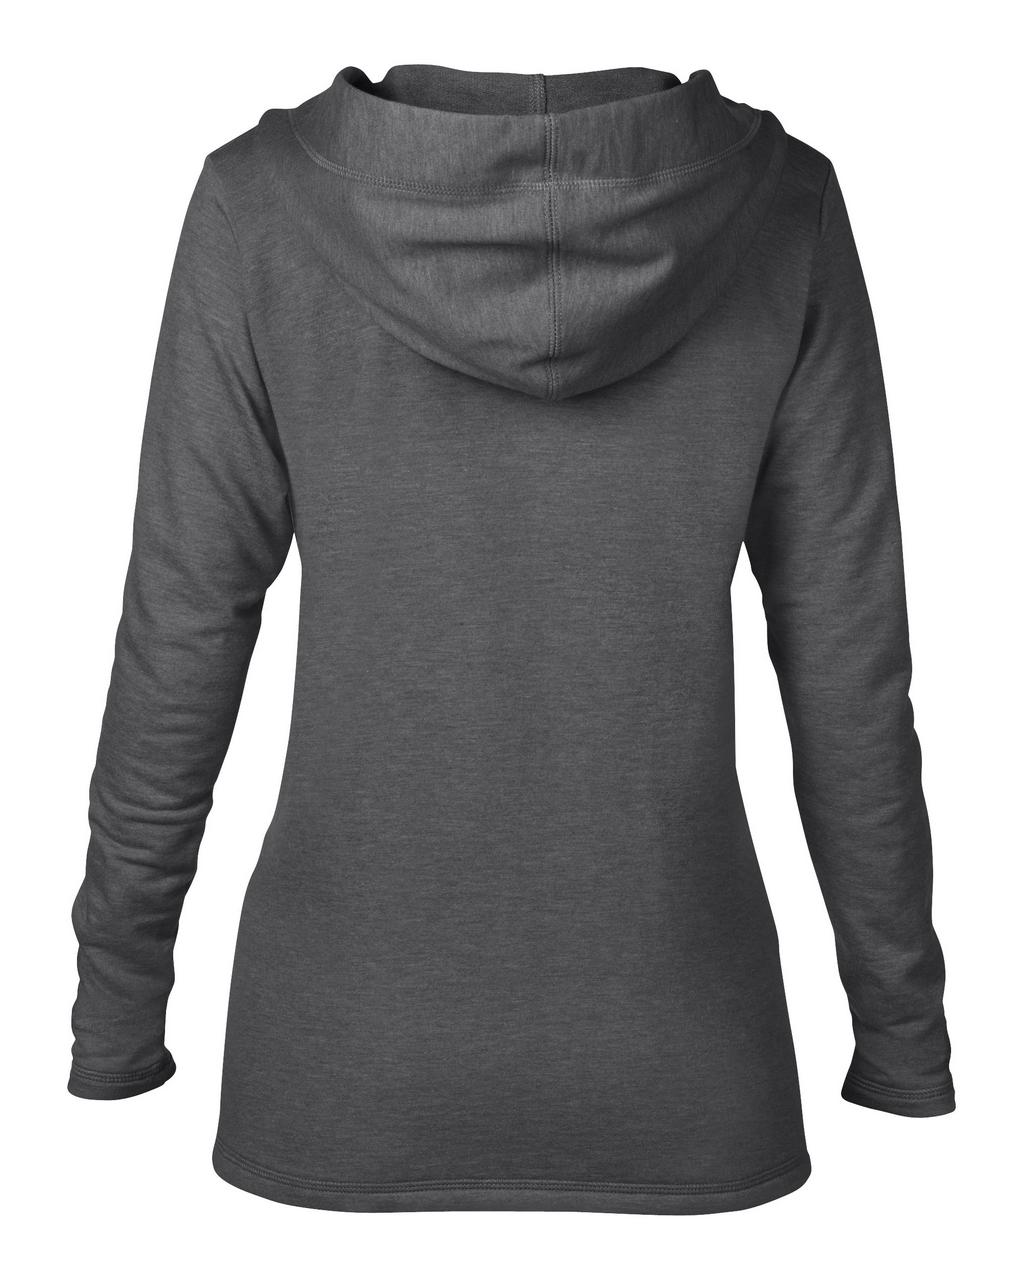 WOMEN’S HOODED FRENCH TERRY